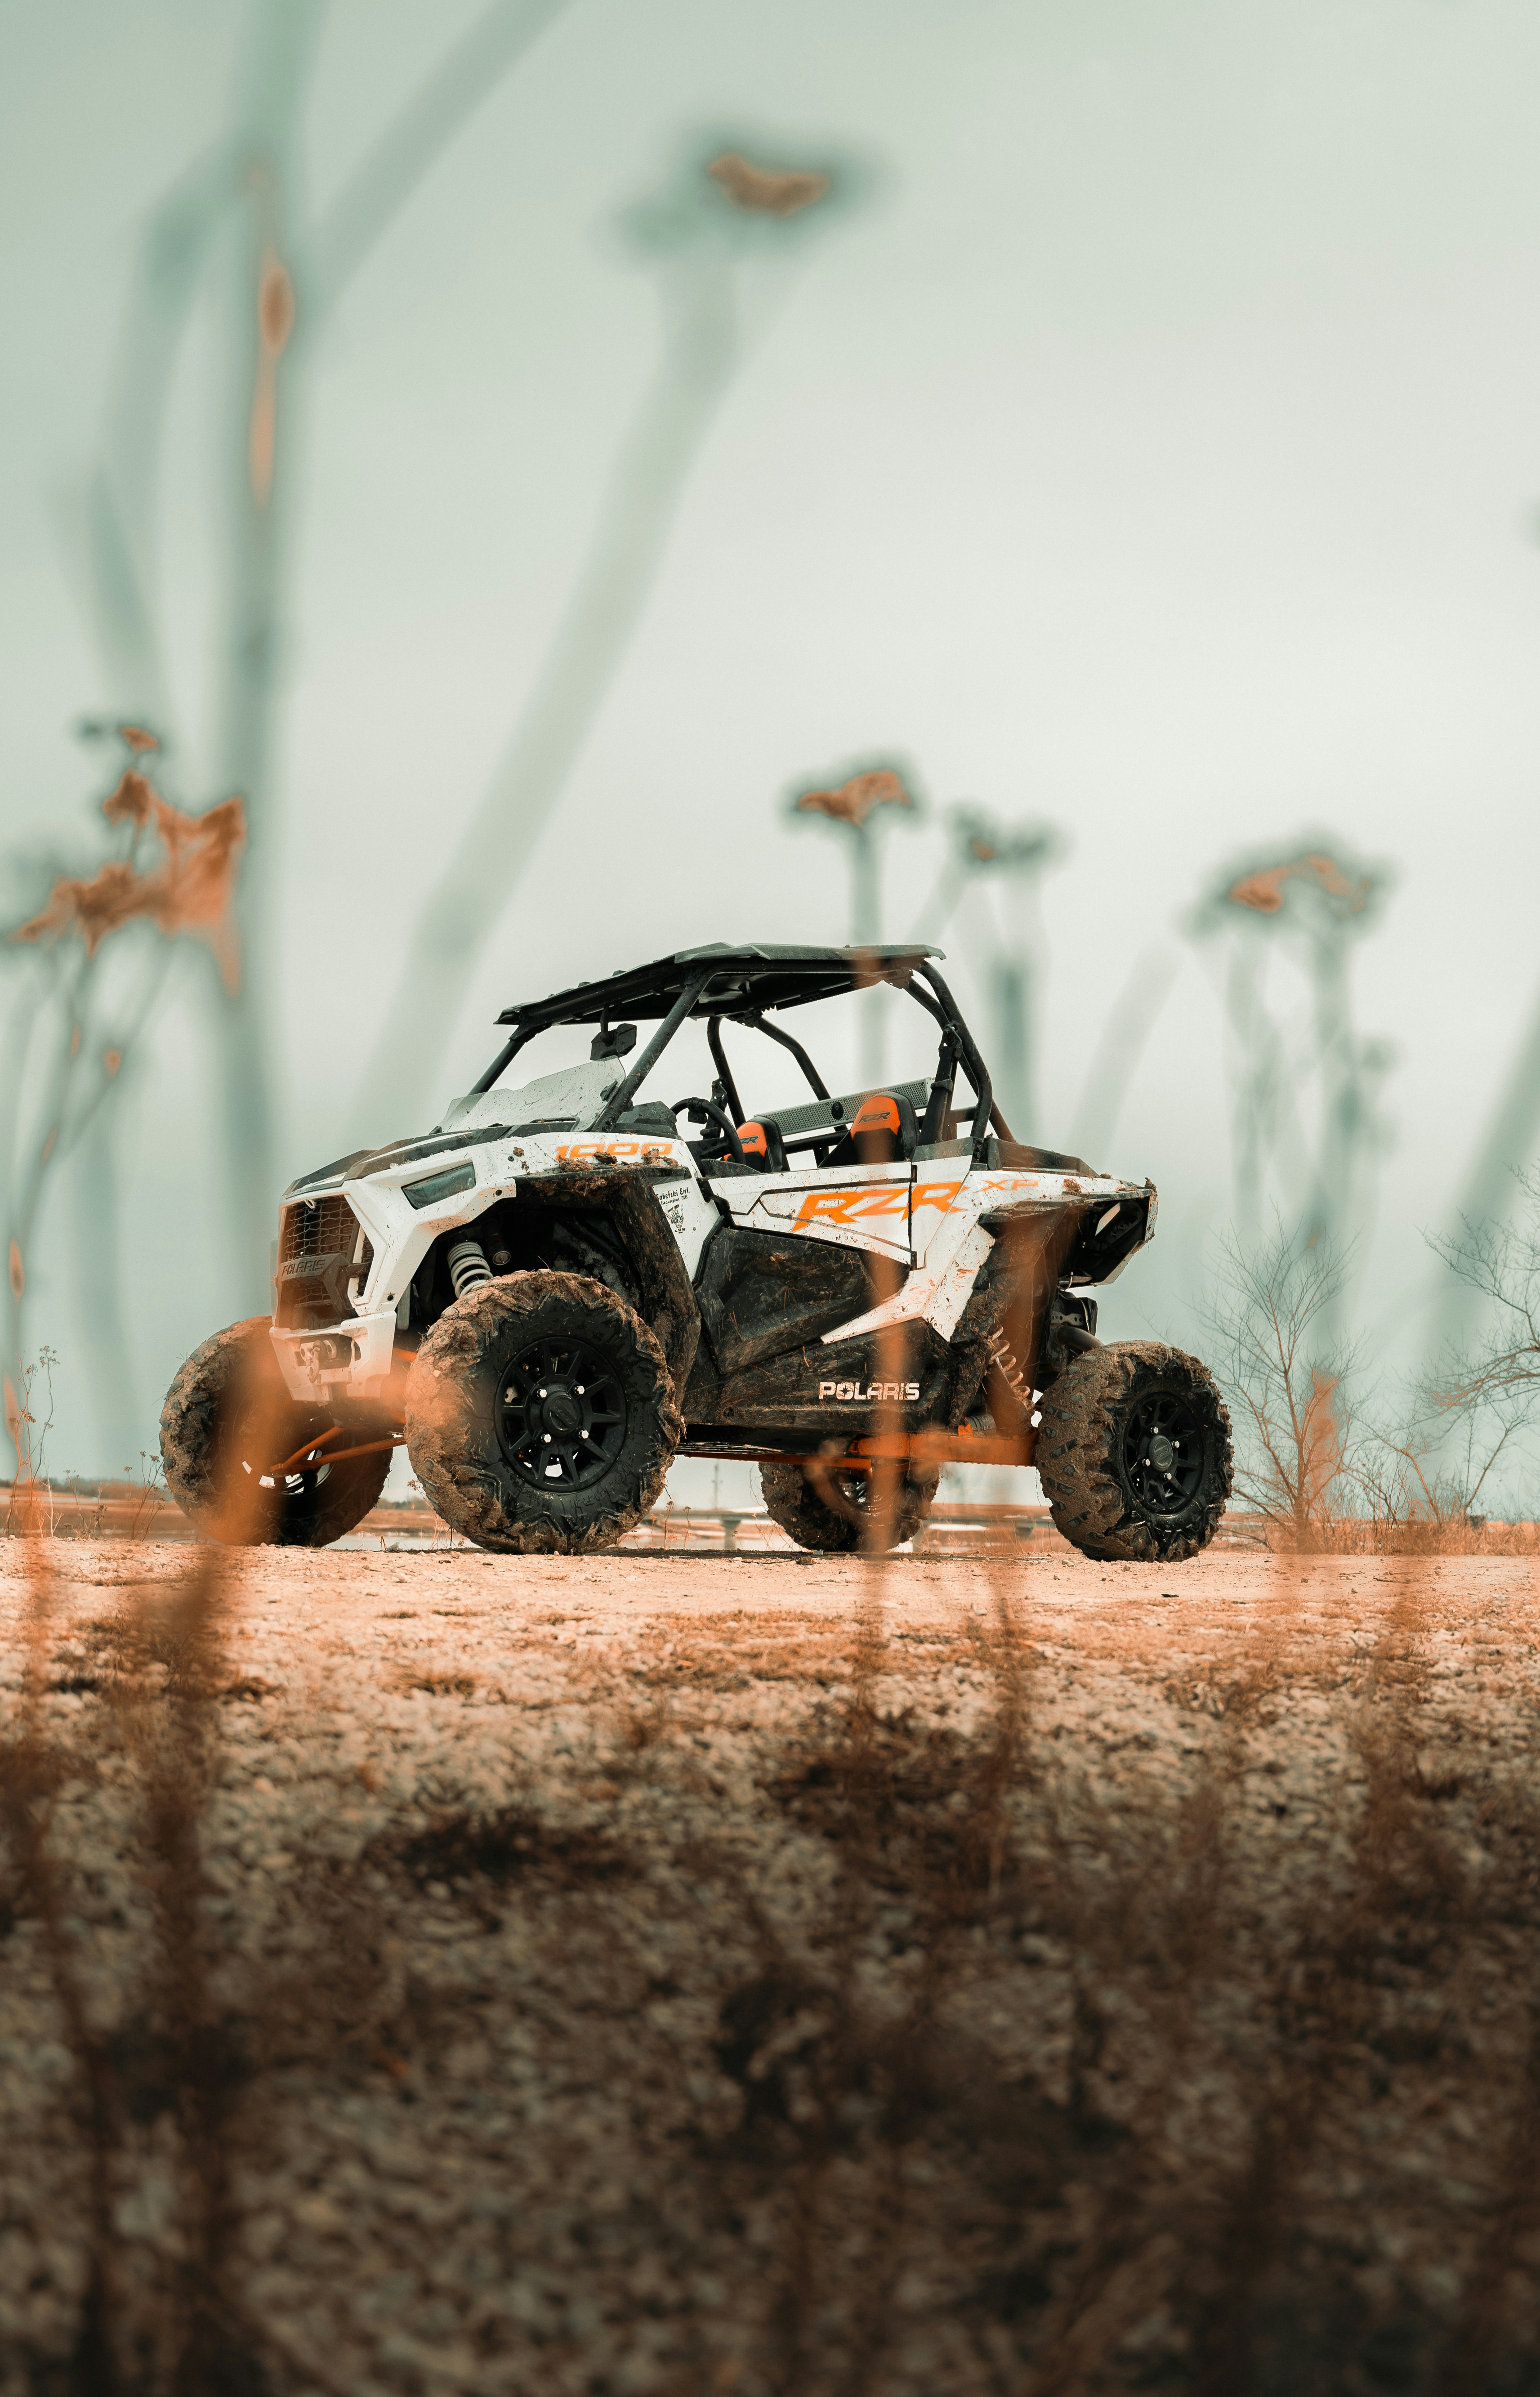 This is a picture of the Polaris RZR, an adjacent model to the Polaris Ranger.